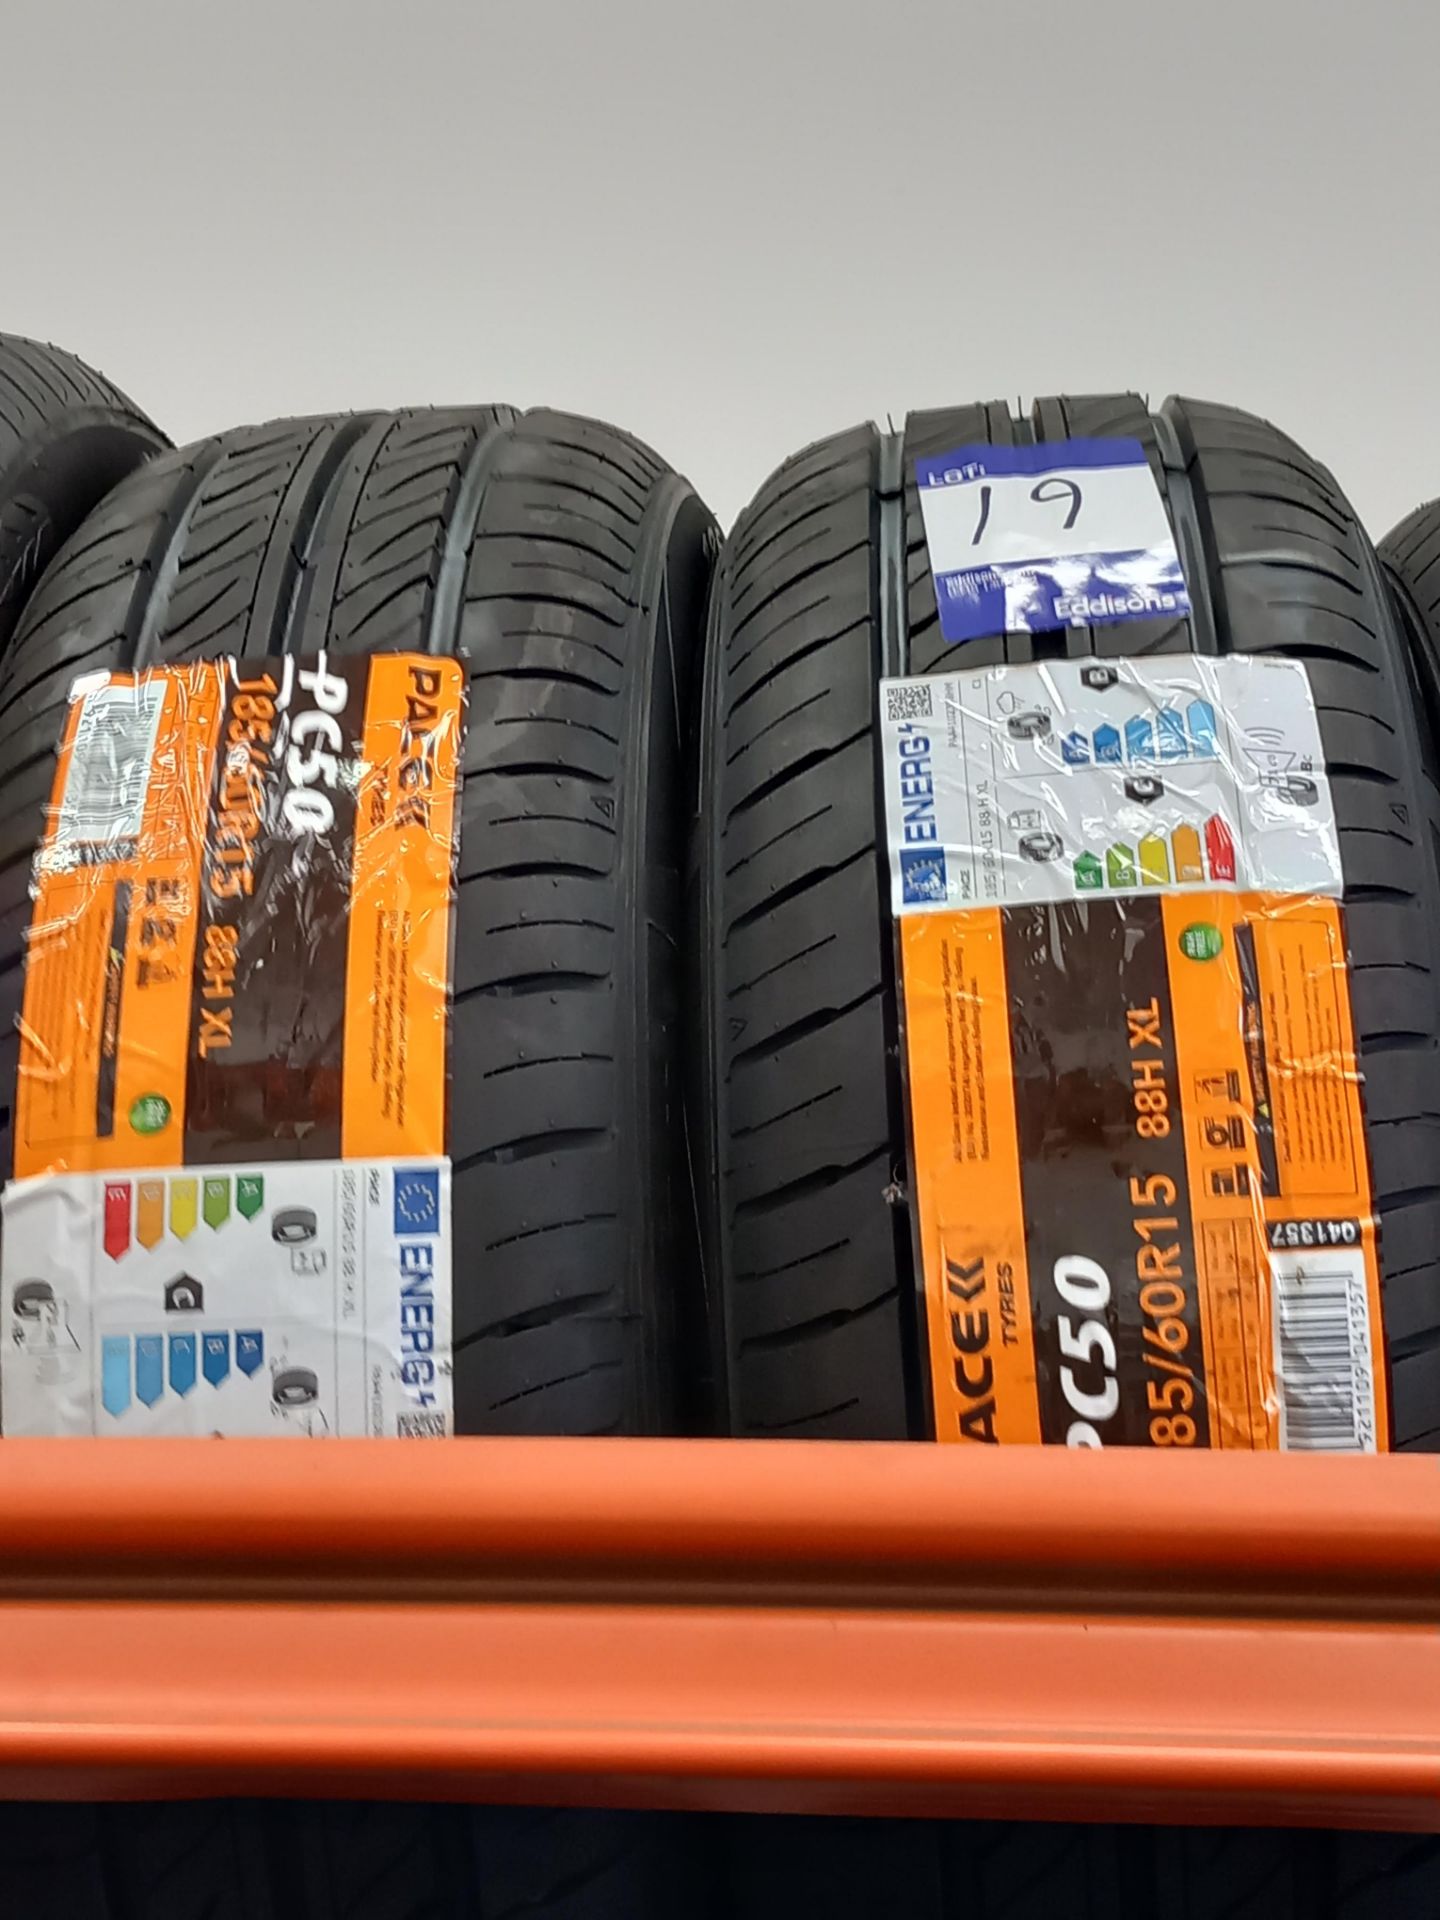 2 Pace 185/60 15 tyres - This is a Composite lot made up of Lots 1 - 96 inclusive. At the end of the